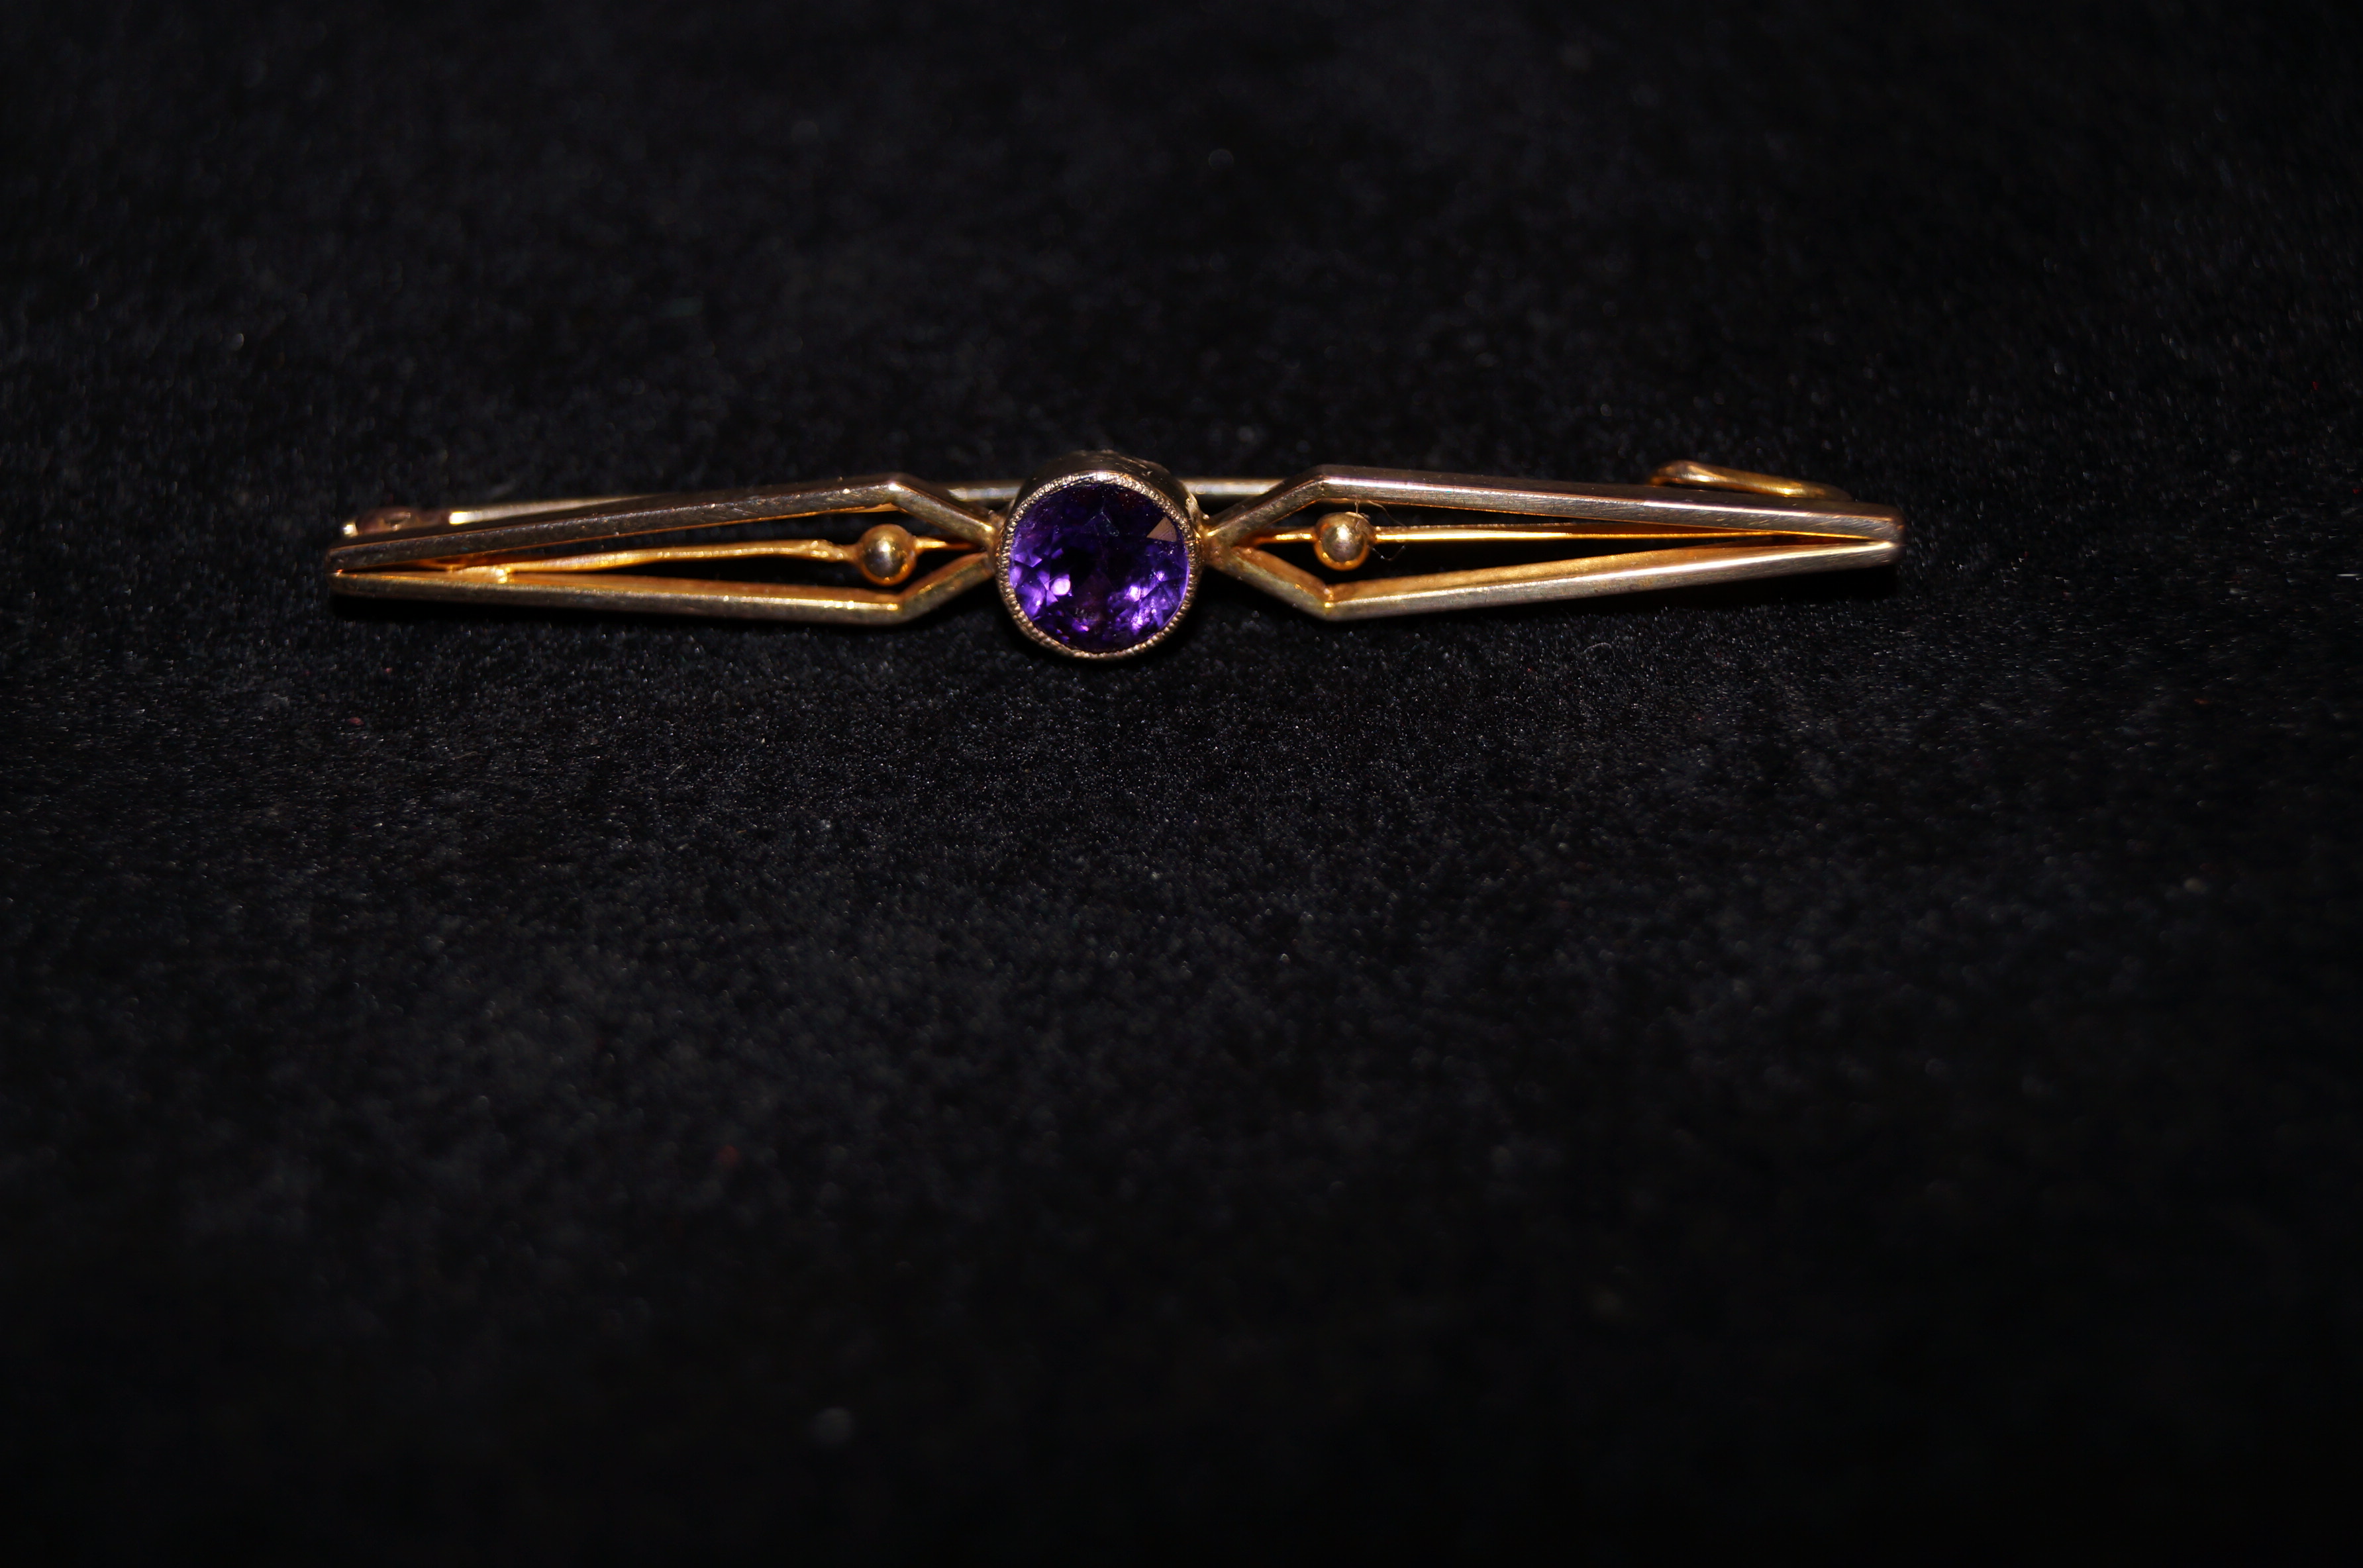 9ct Gold pin brooch set with central amethyst